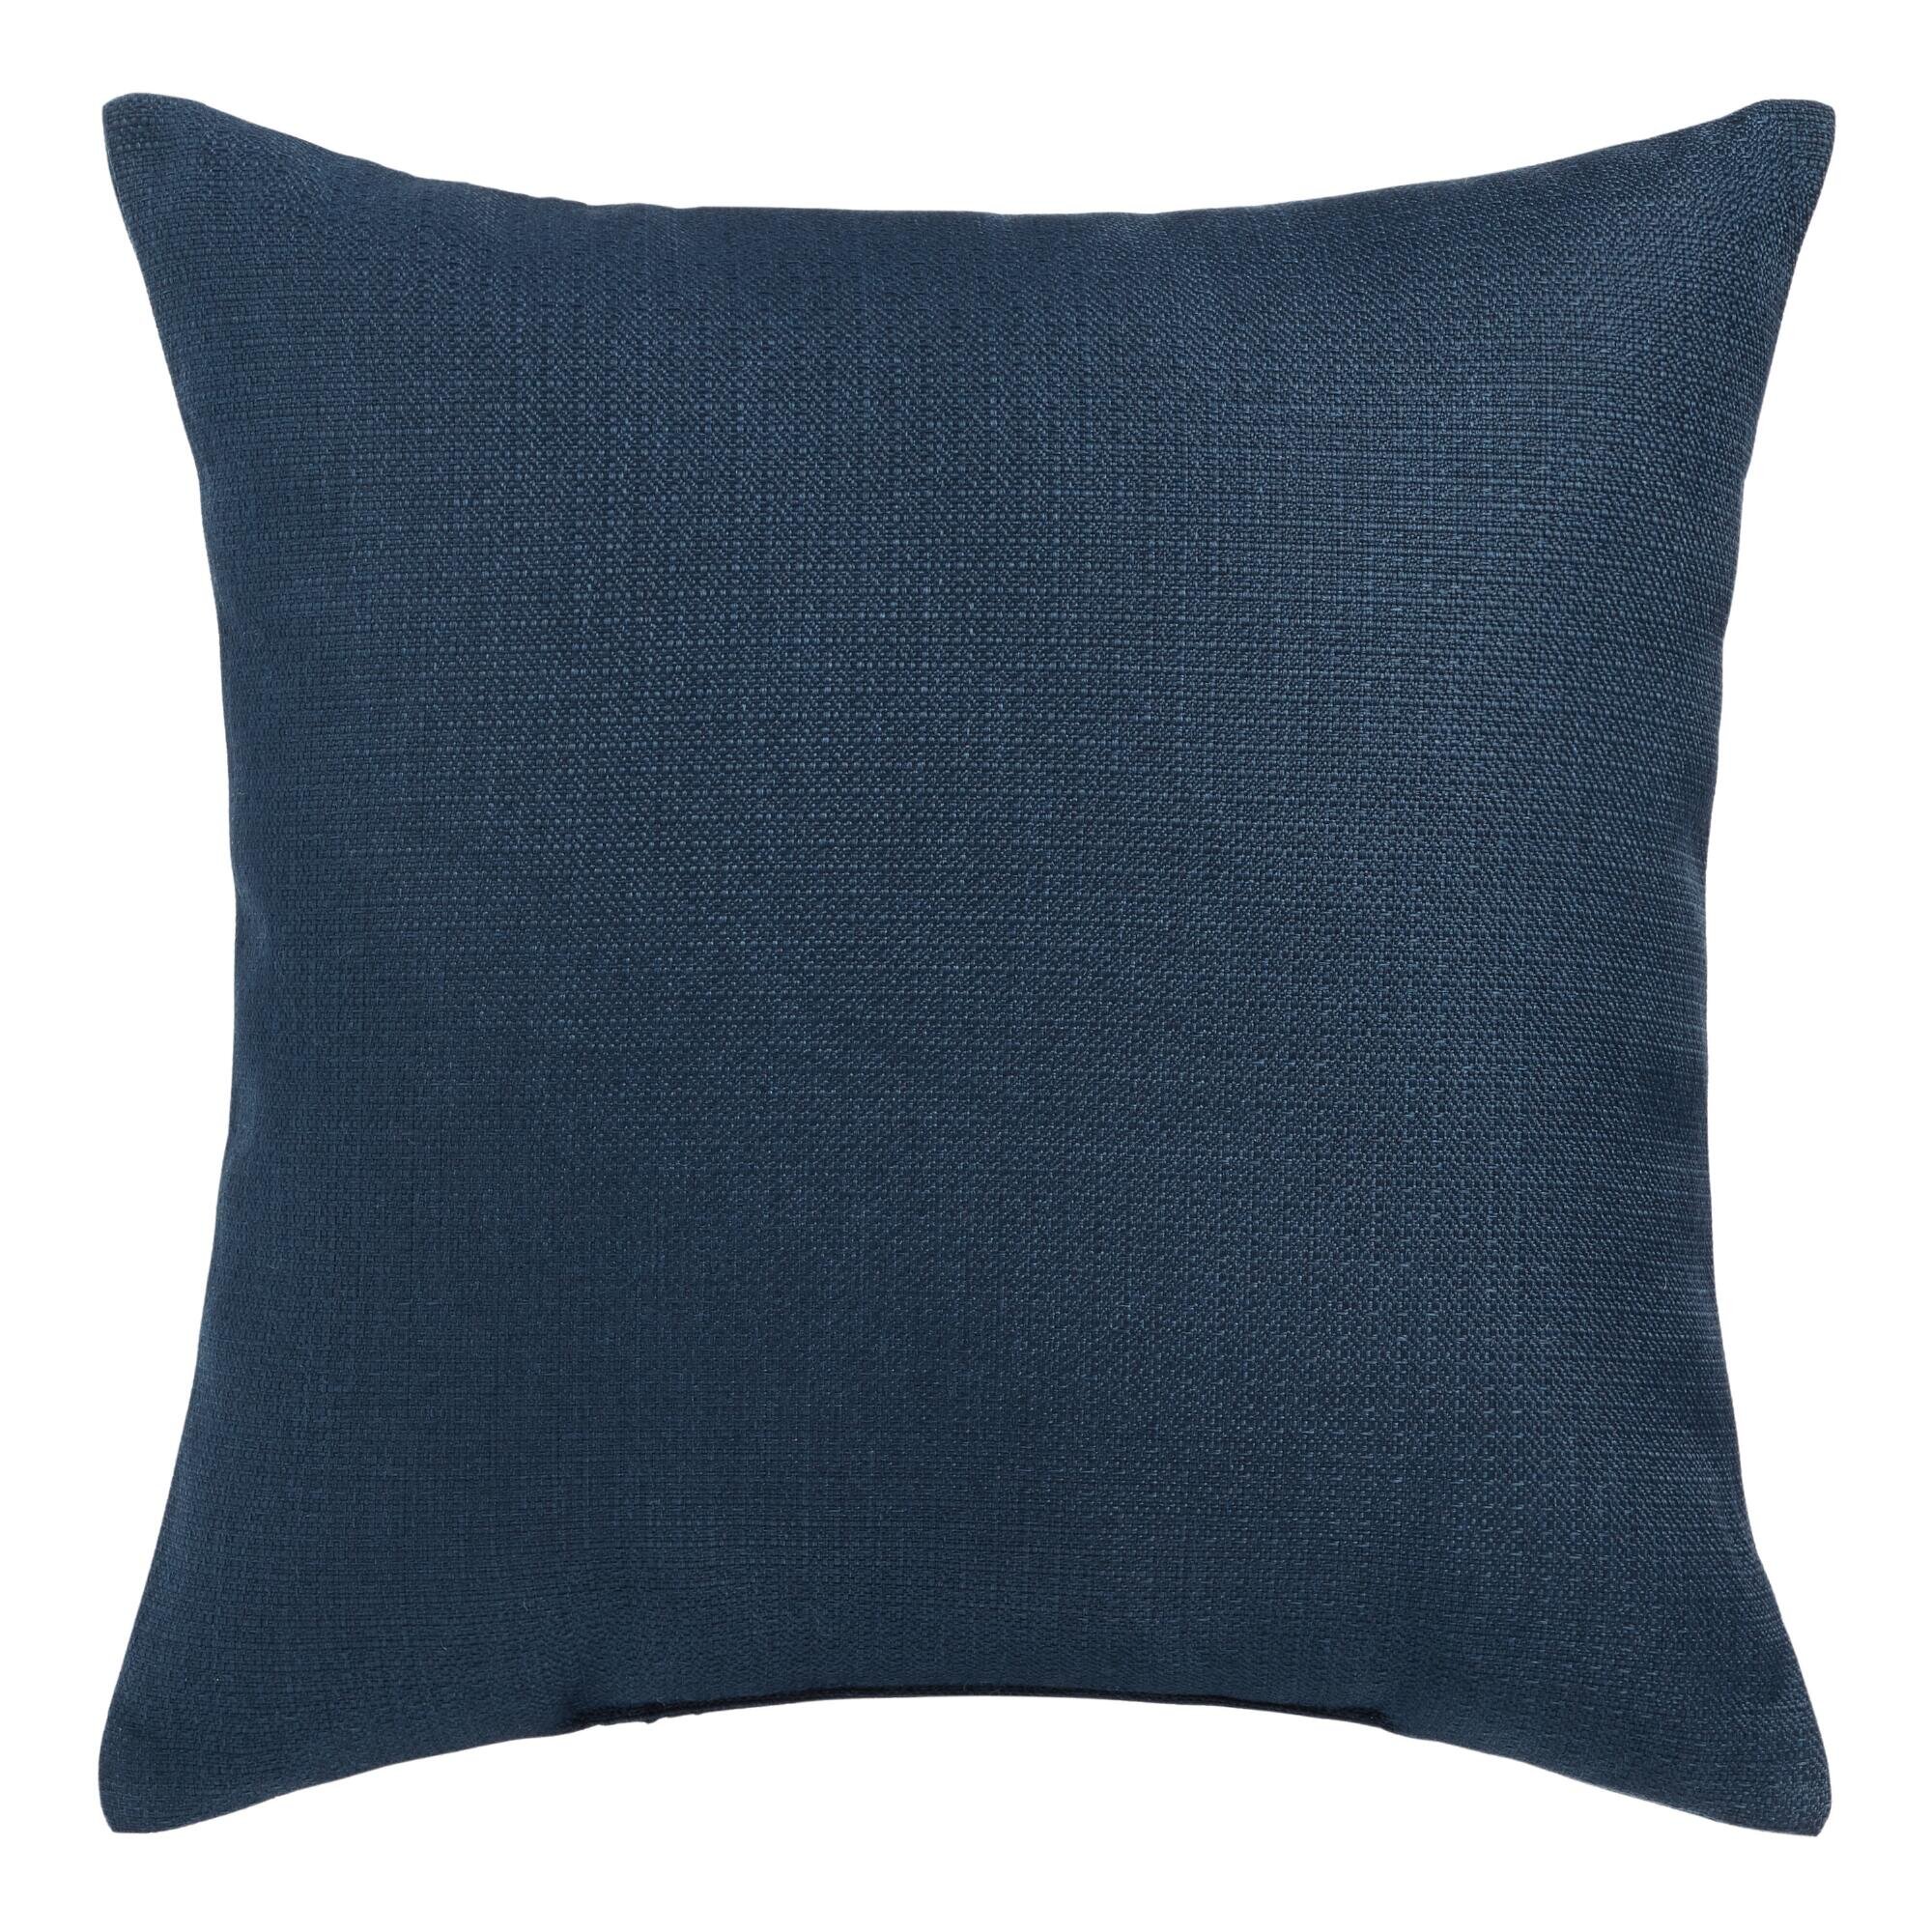 Solid Outdoor Throw Pillow - $11.89 from World Market